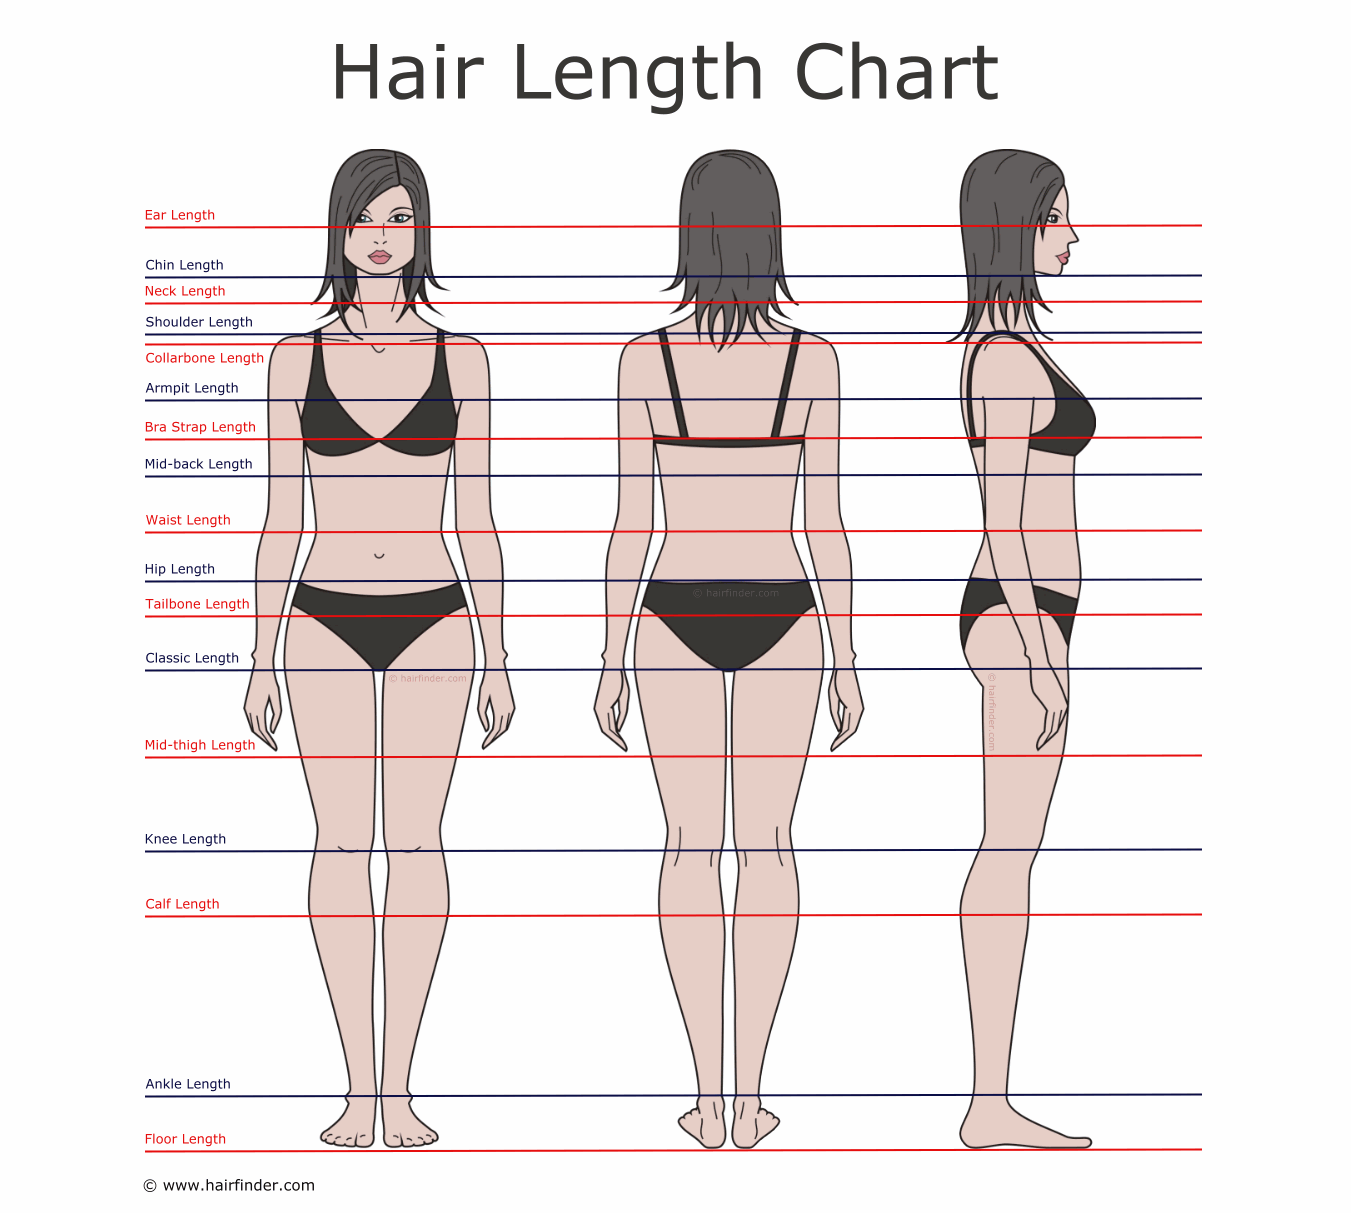 Descriptions of hair lengths and growing times | Hair length chart